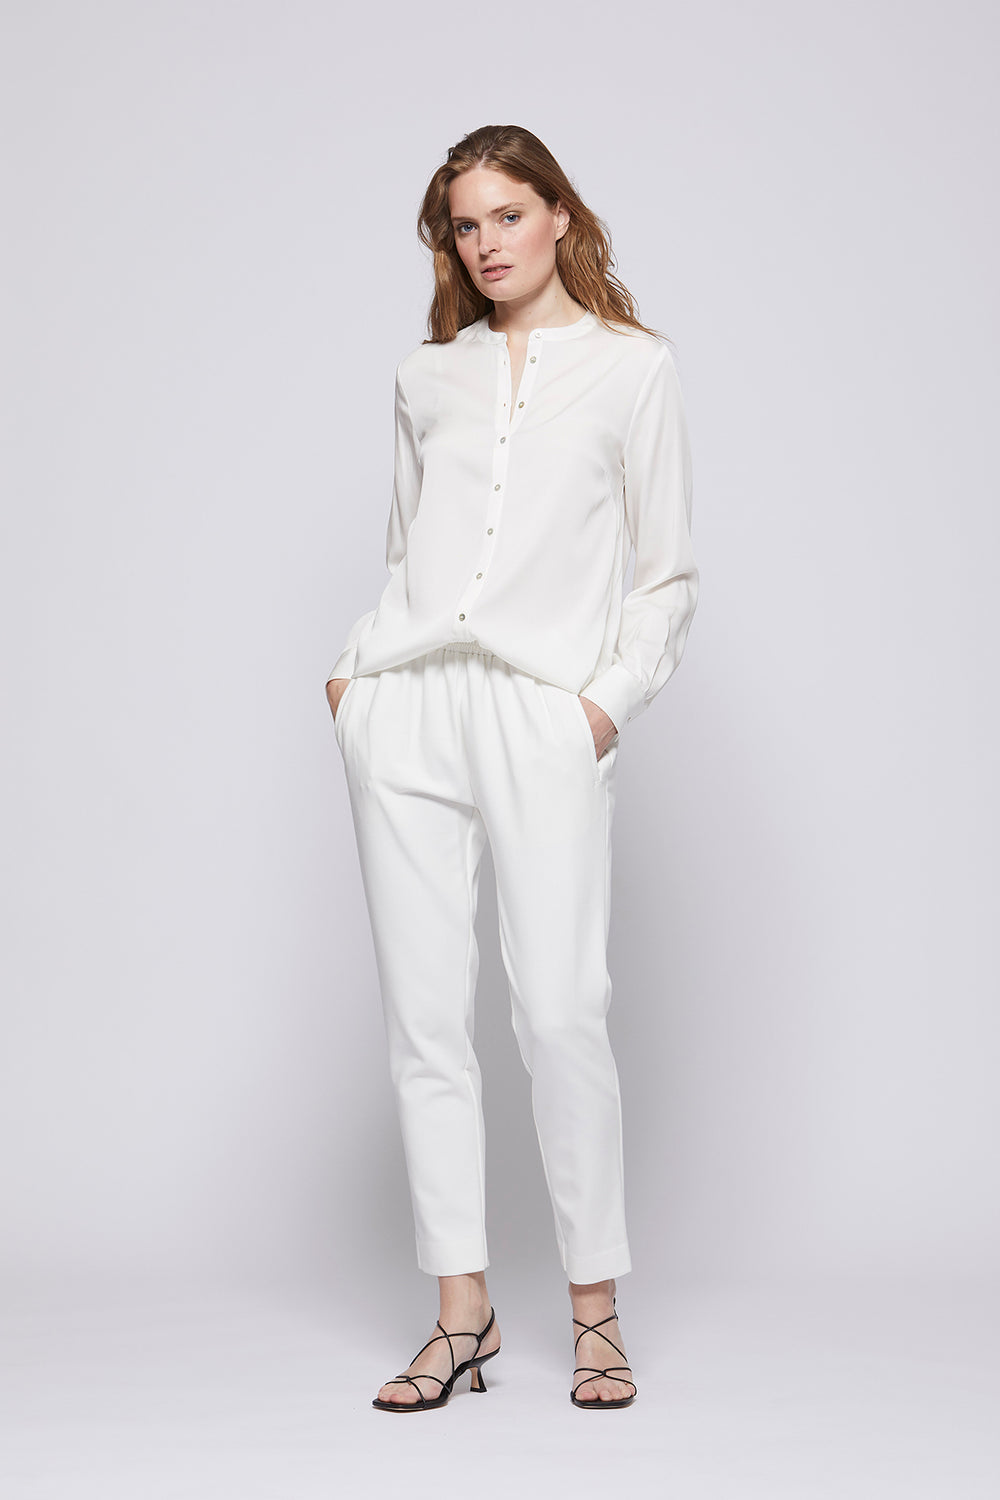 Heartmade Naya HM TROUSERS 104 Off White